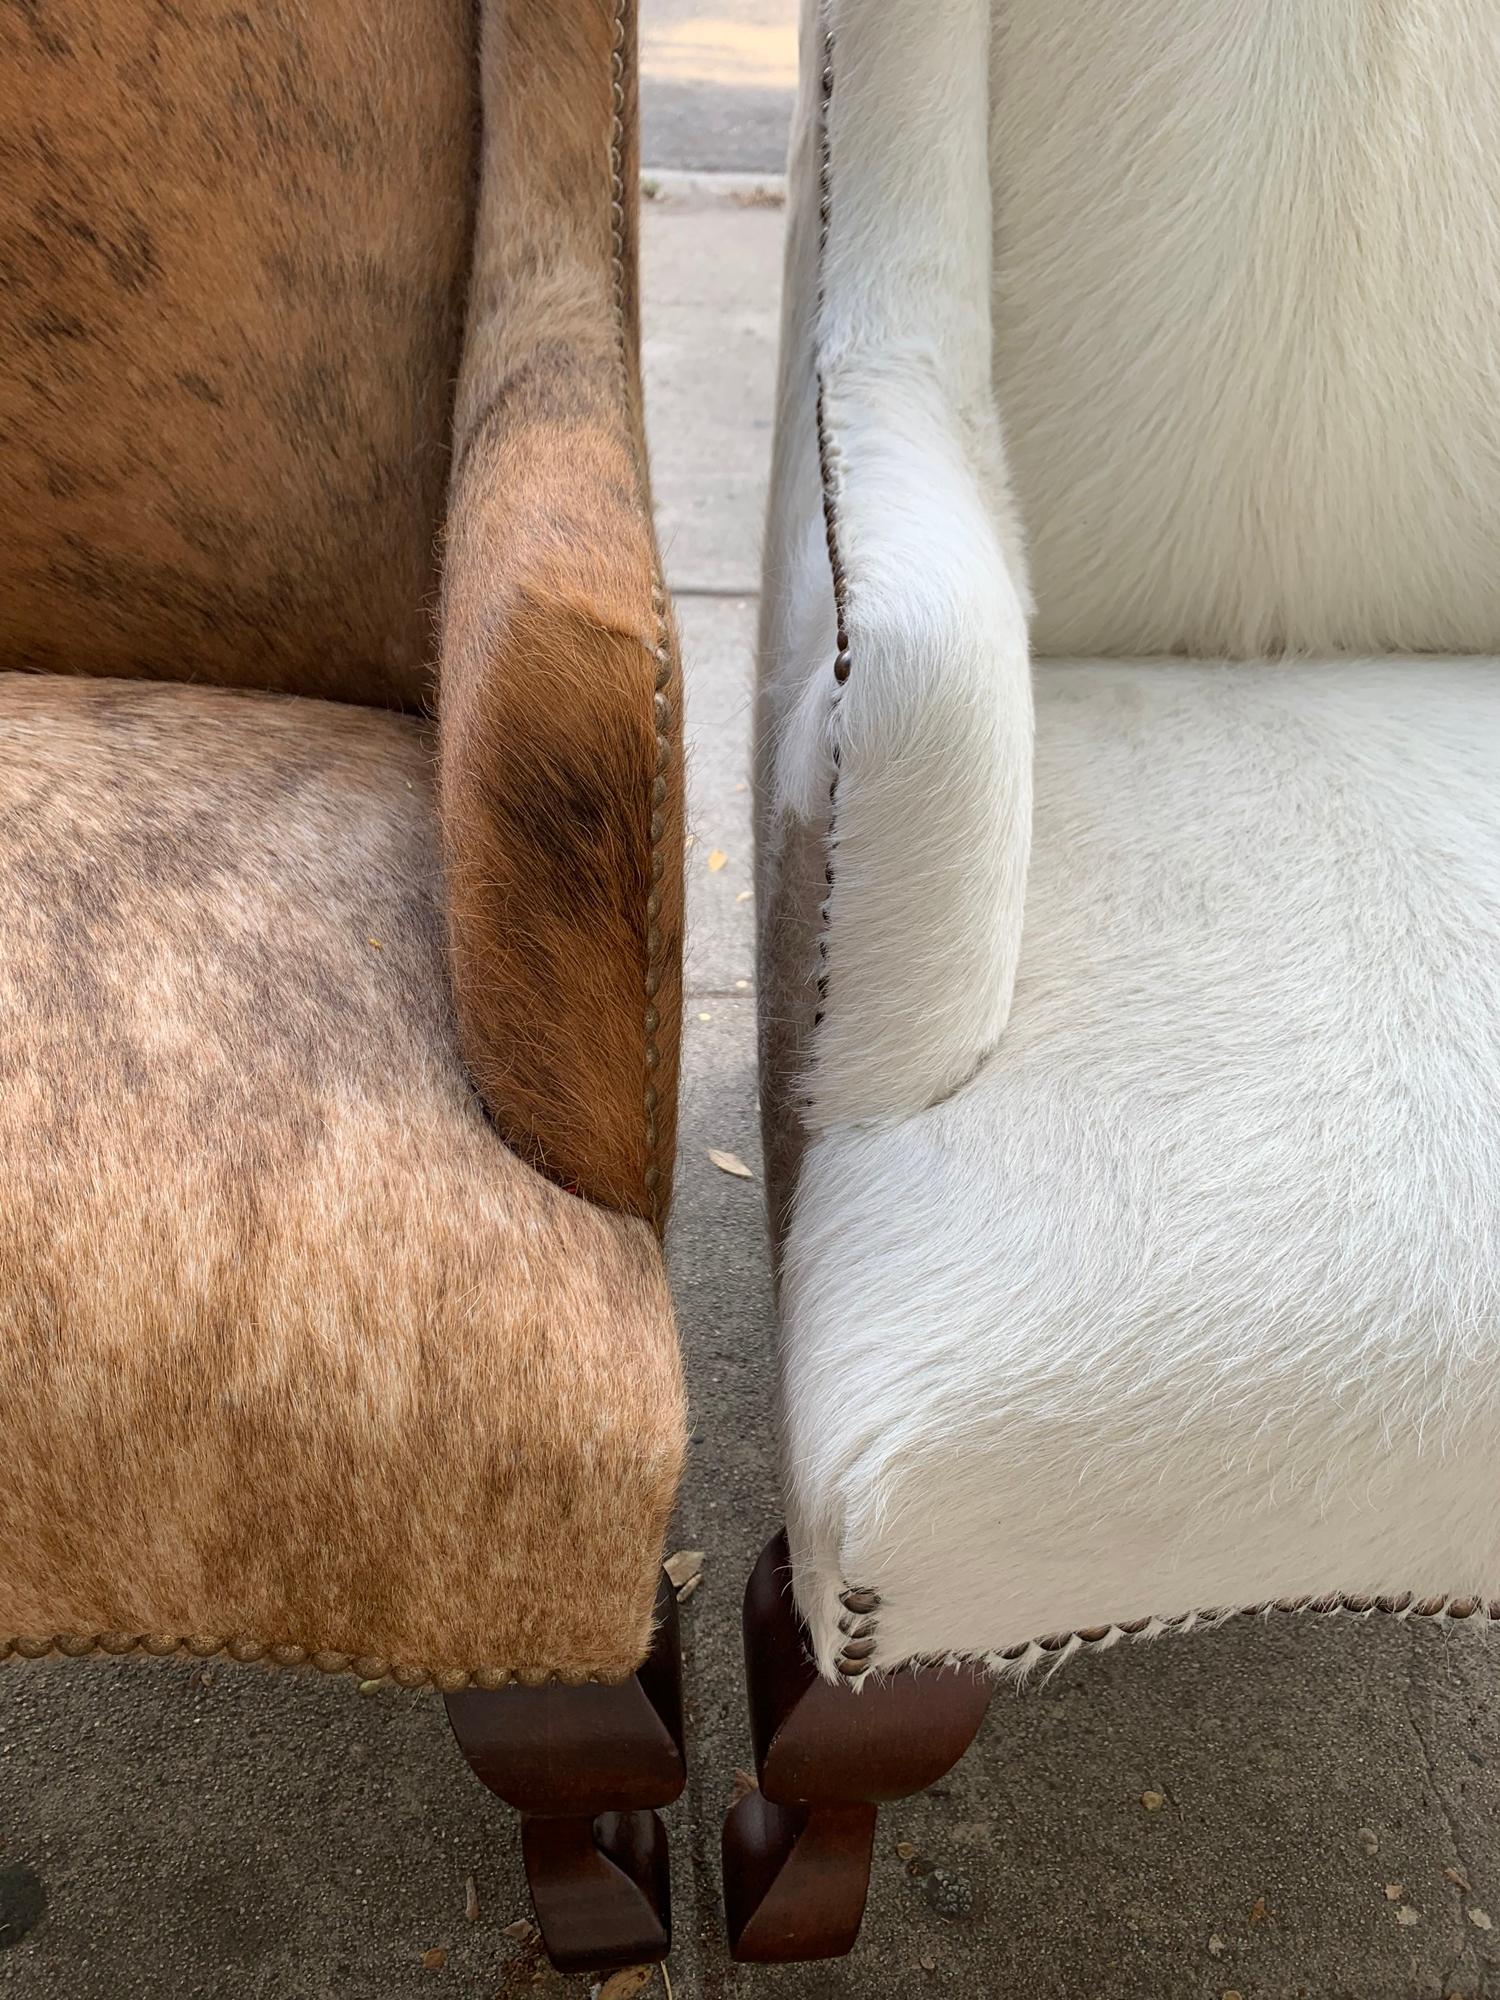 Modern Pair of Wingback Chairs 1 in Brown Cowhide and 1 in White Cowhide Leather